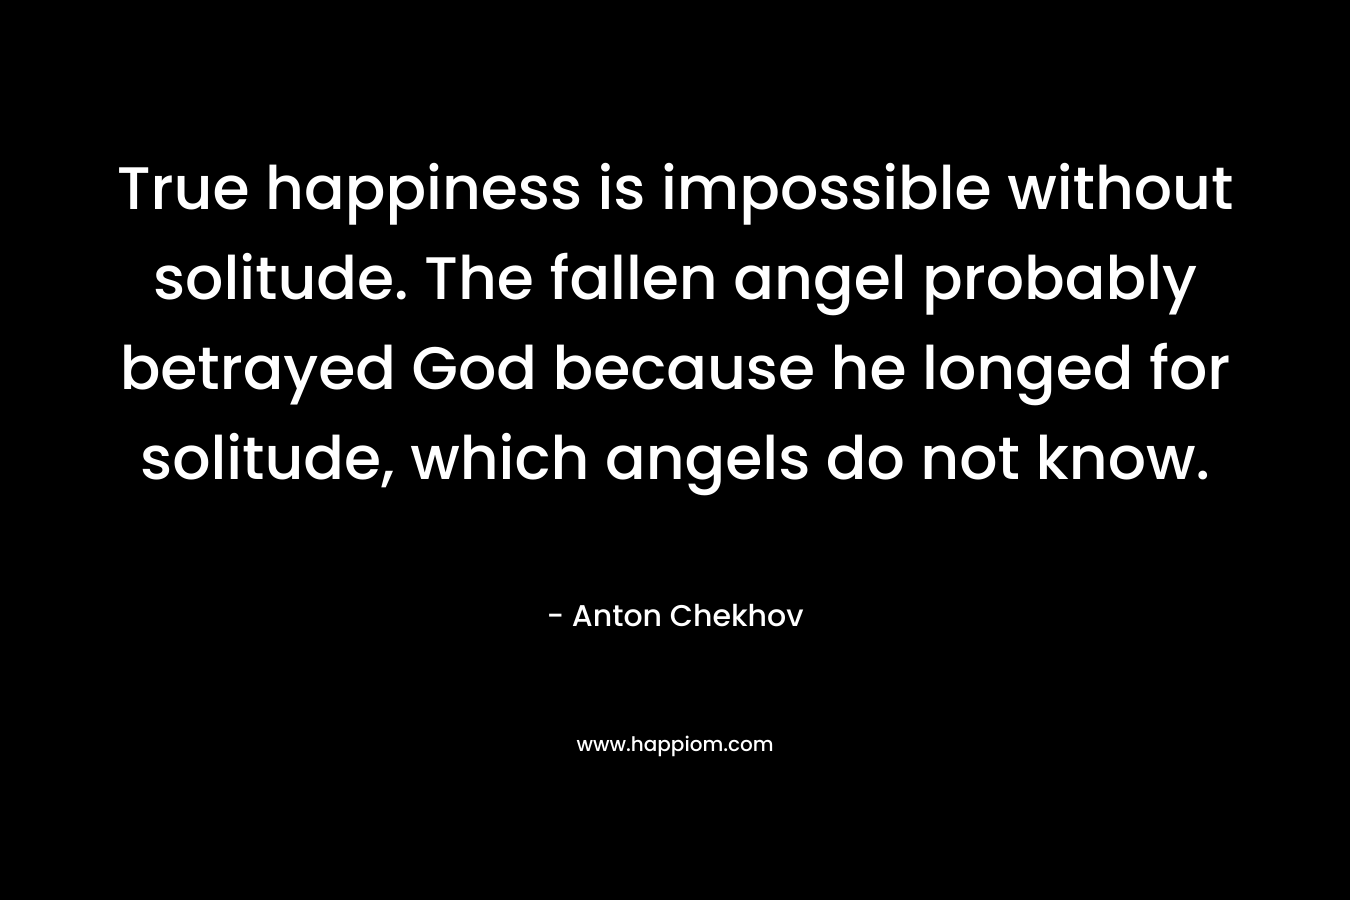 True happiness is impossible without solitude. The fallen angel probably betrayed God because he longed for solitude, which angels do not know.